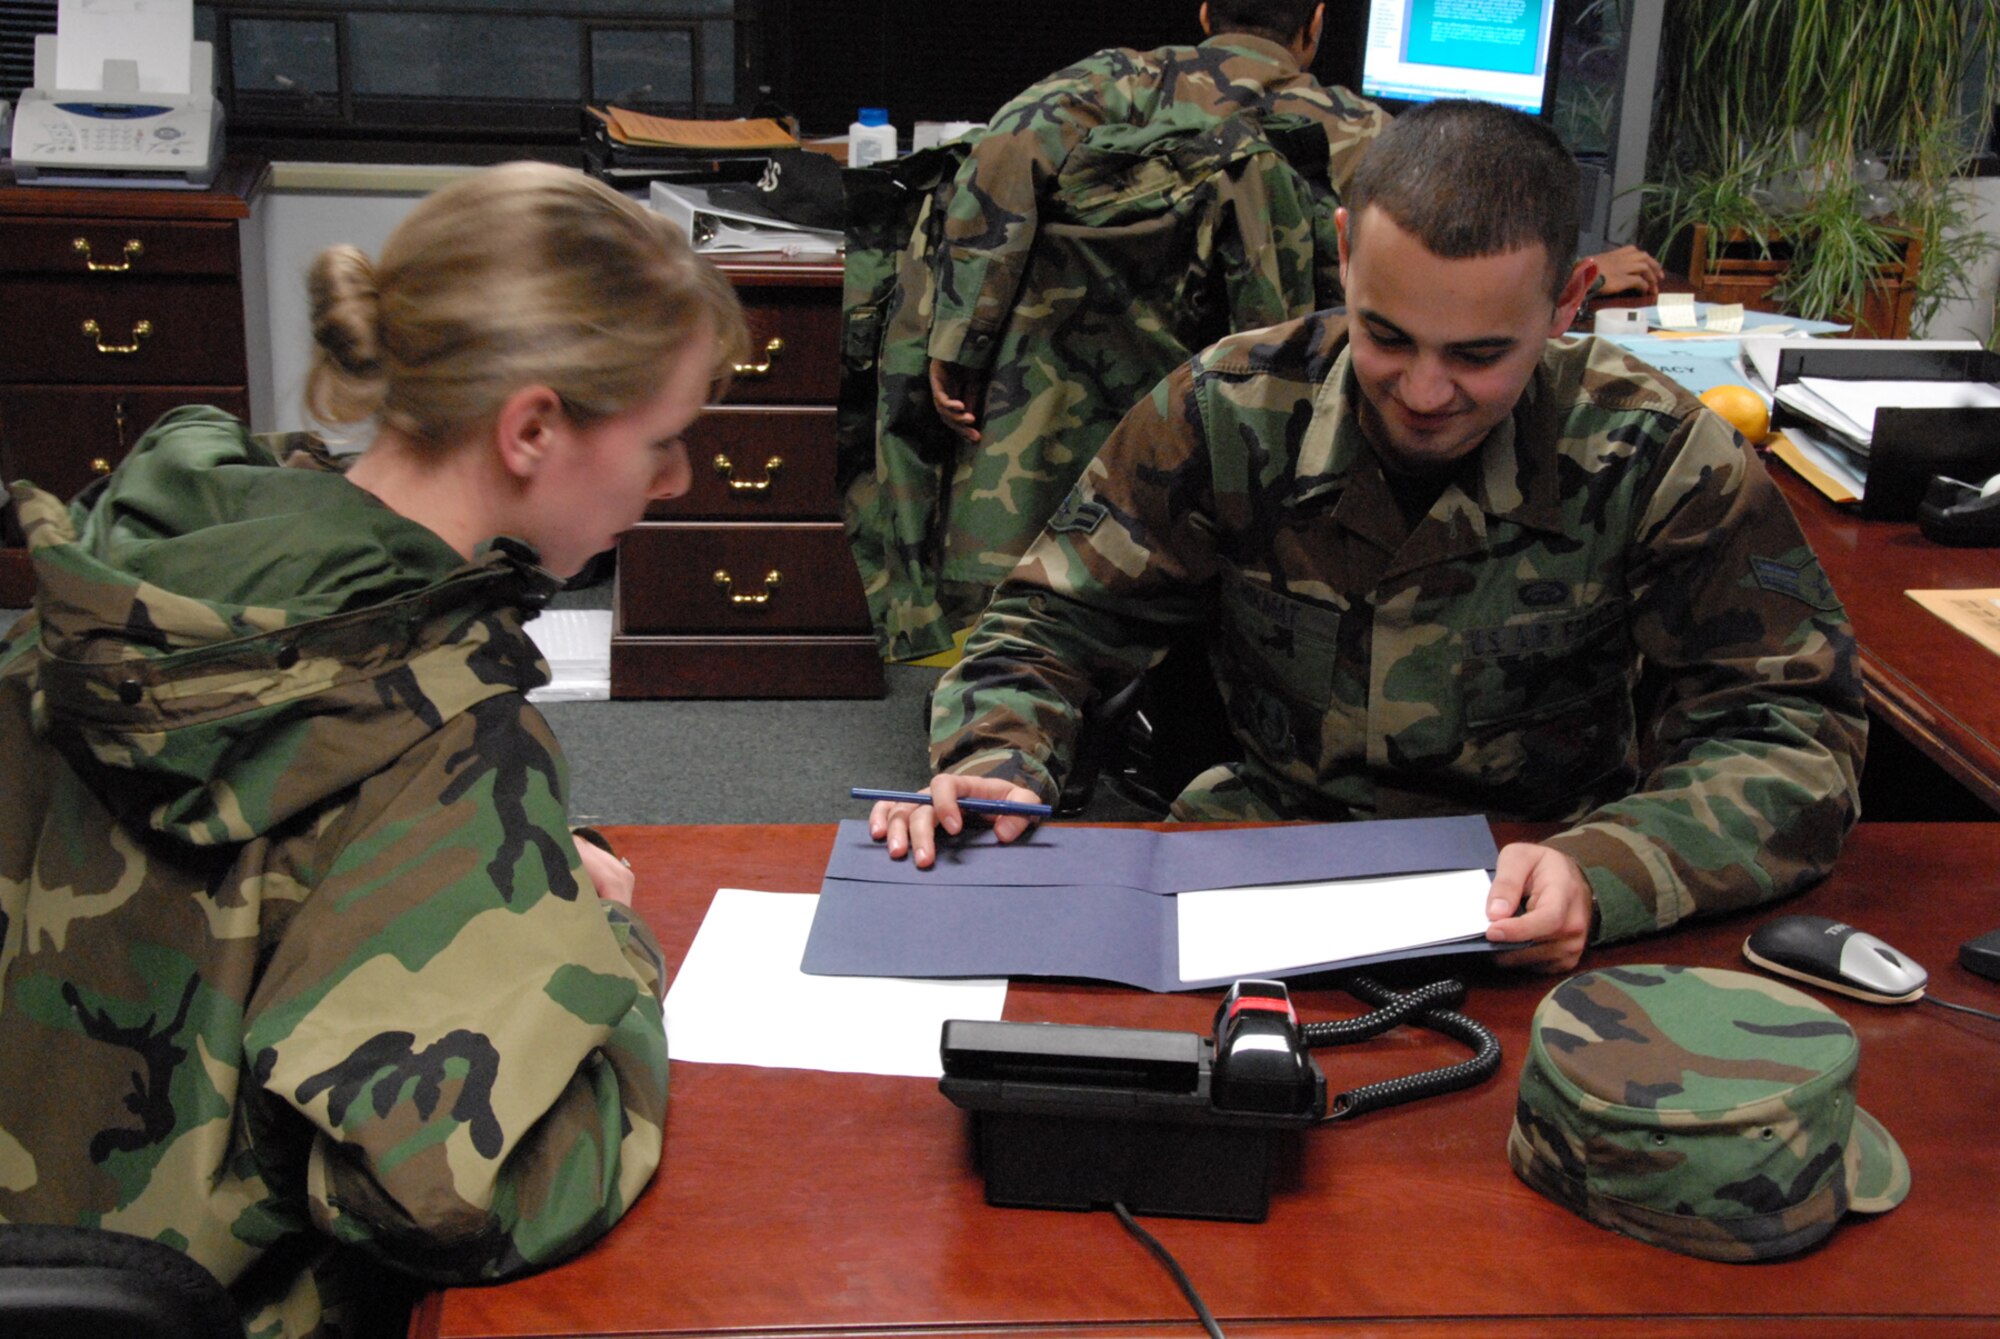 Airman 1st Class Zana Hikmat, 66th Mission Support Squadron personnelist, assists 1st Lt. Martha Petersante-Gioia, 66th Air Base Wing Public Affairs, with paperwork. (US Air Force Photo by Airman 1st Class Clinton Atkins)